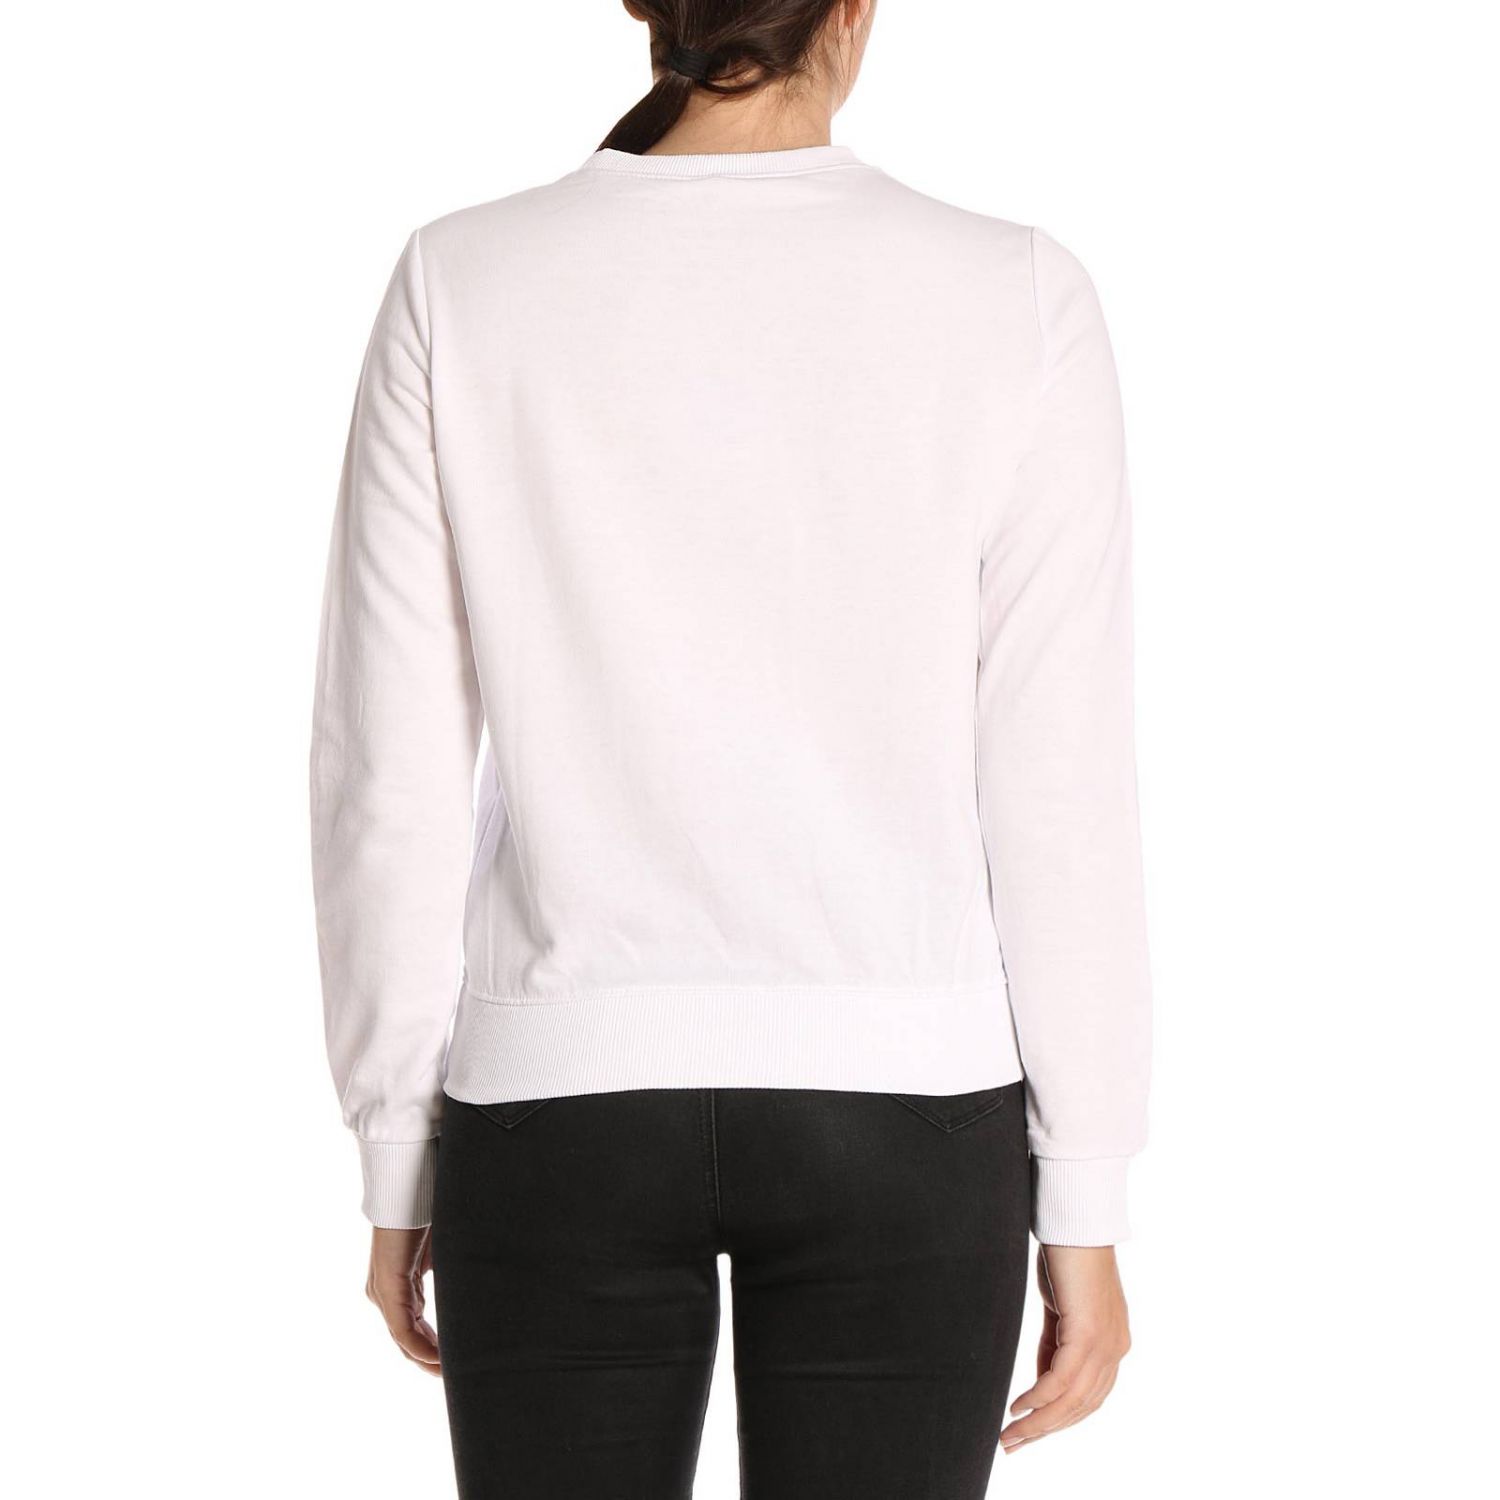 1921 Outlet: Sweater women - White | Sweater 1921 #05 . GIGLIO.COM